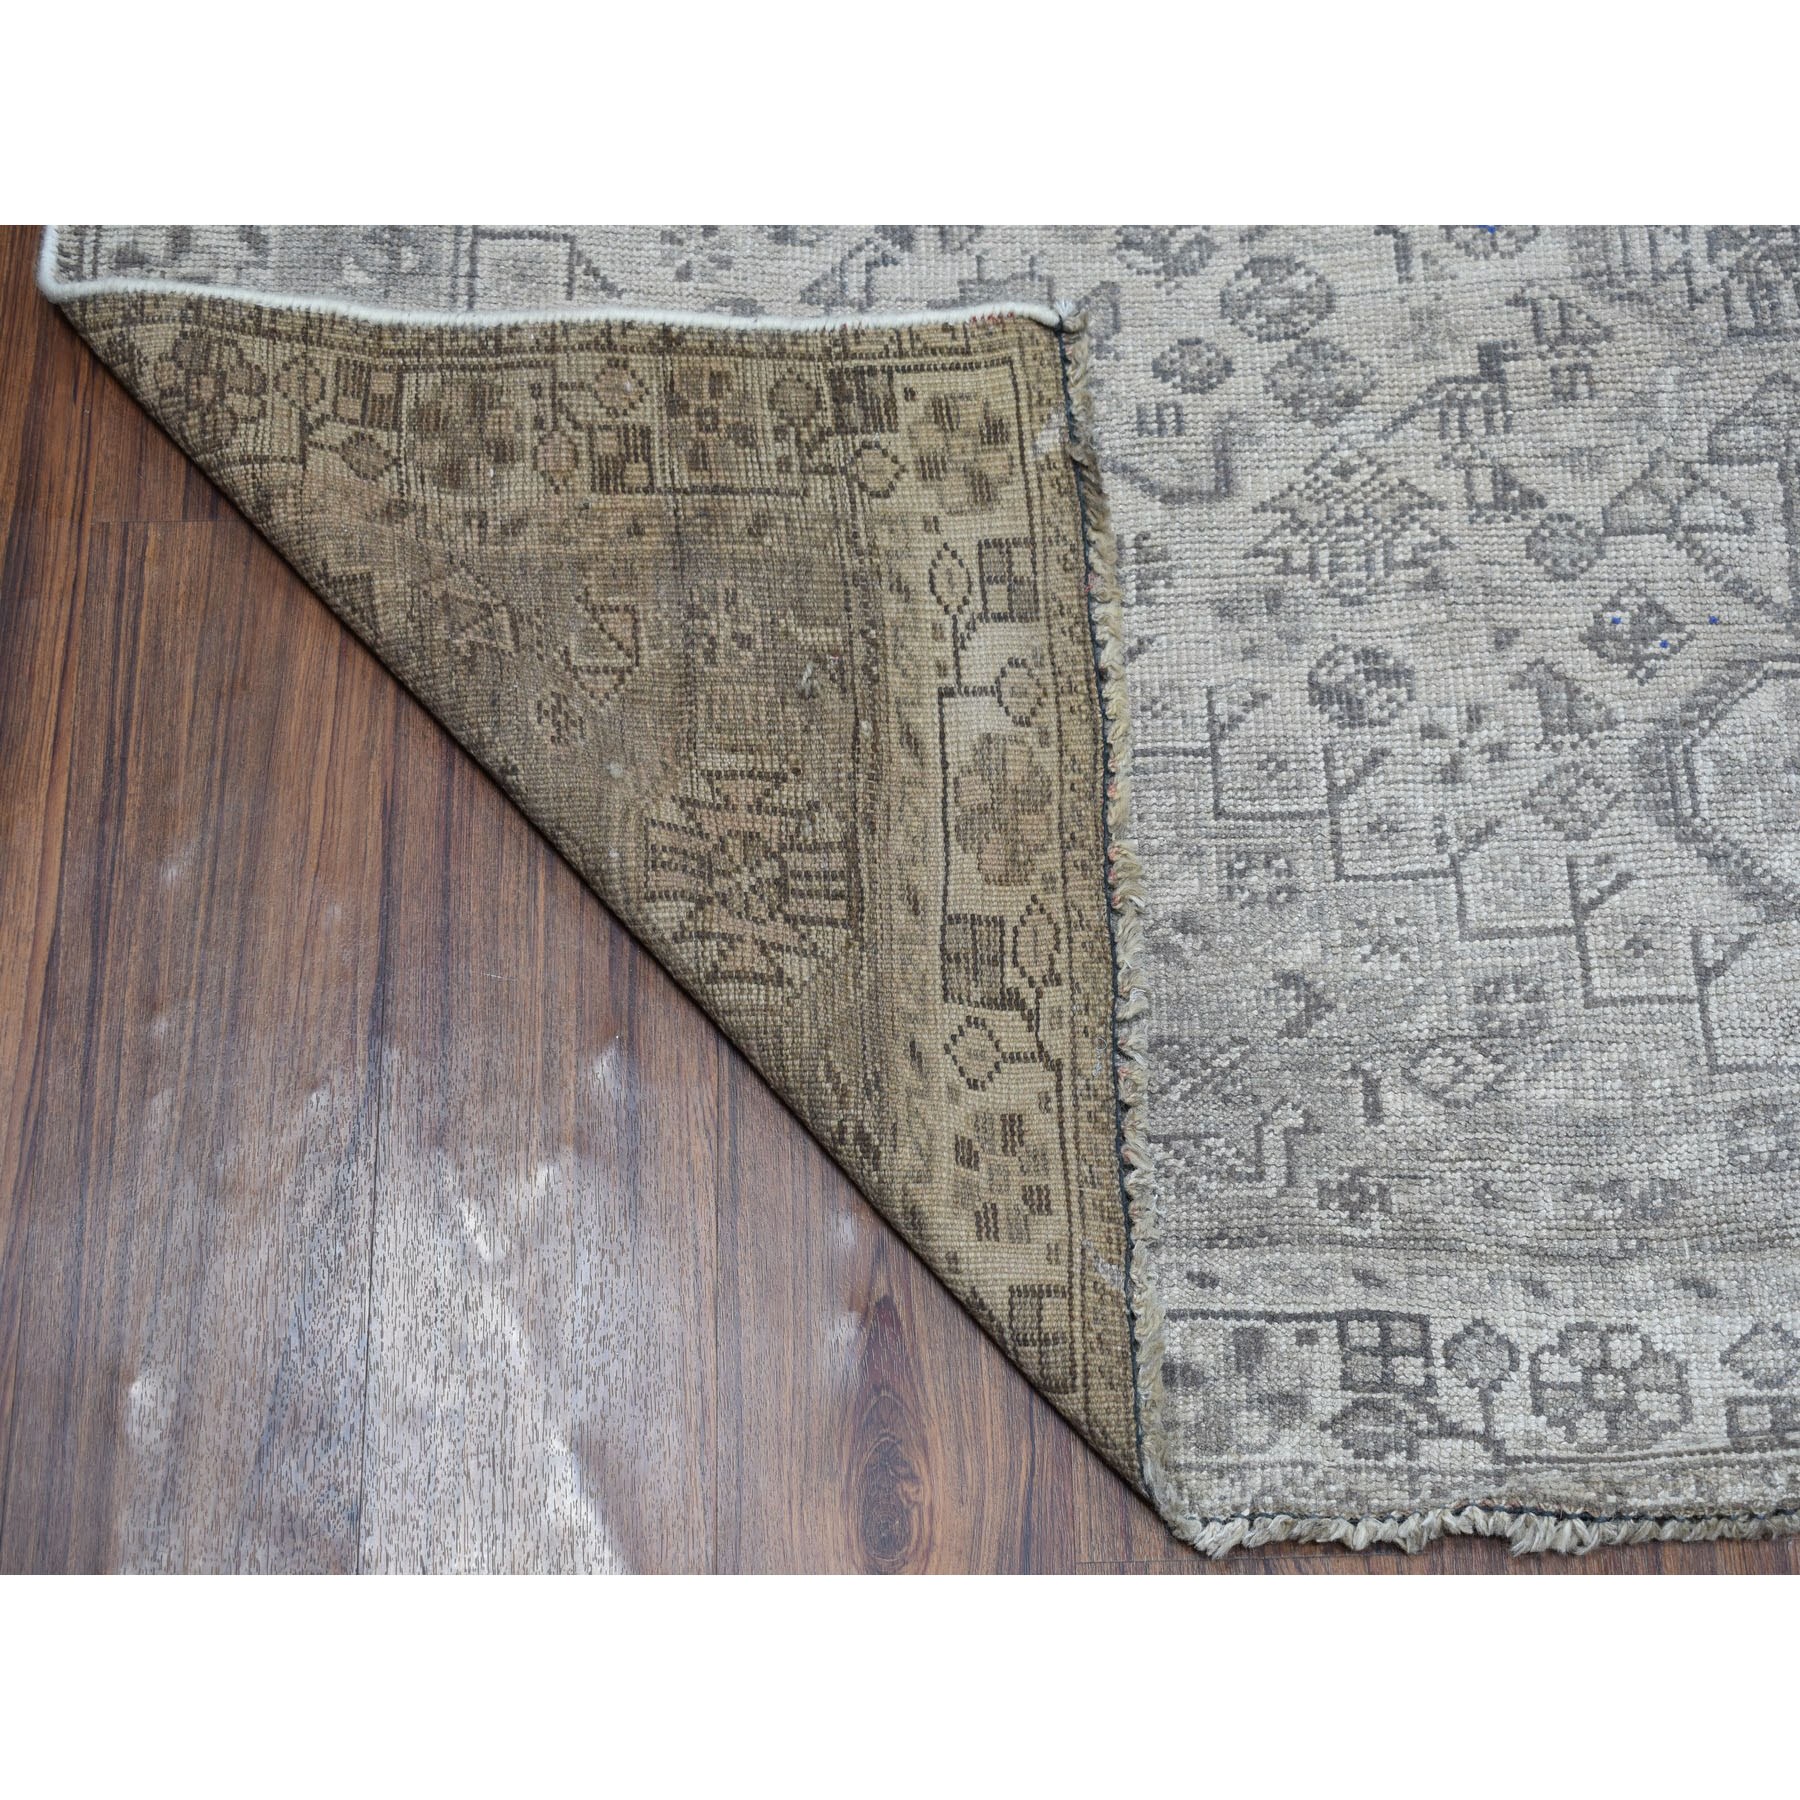 5-7 x8-5  Vintage And Worn Down Distressed Colors Persian Shiraz Hand Knotted Bohemian Rug 